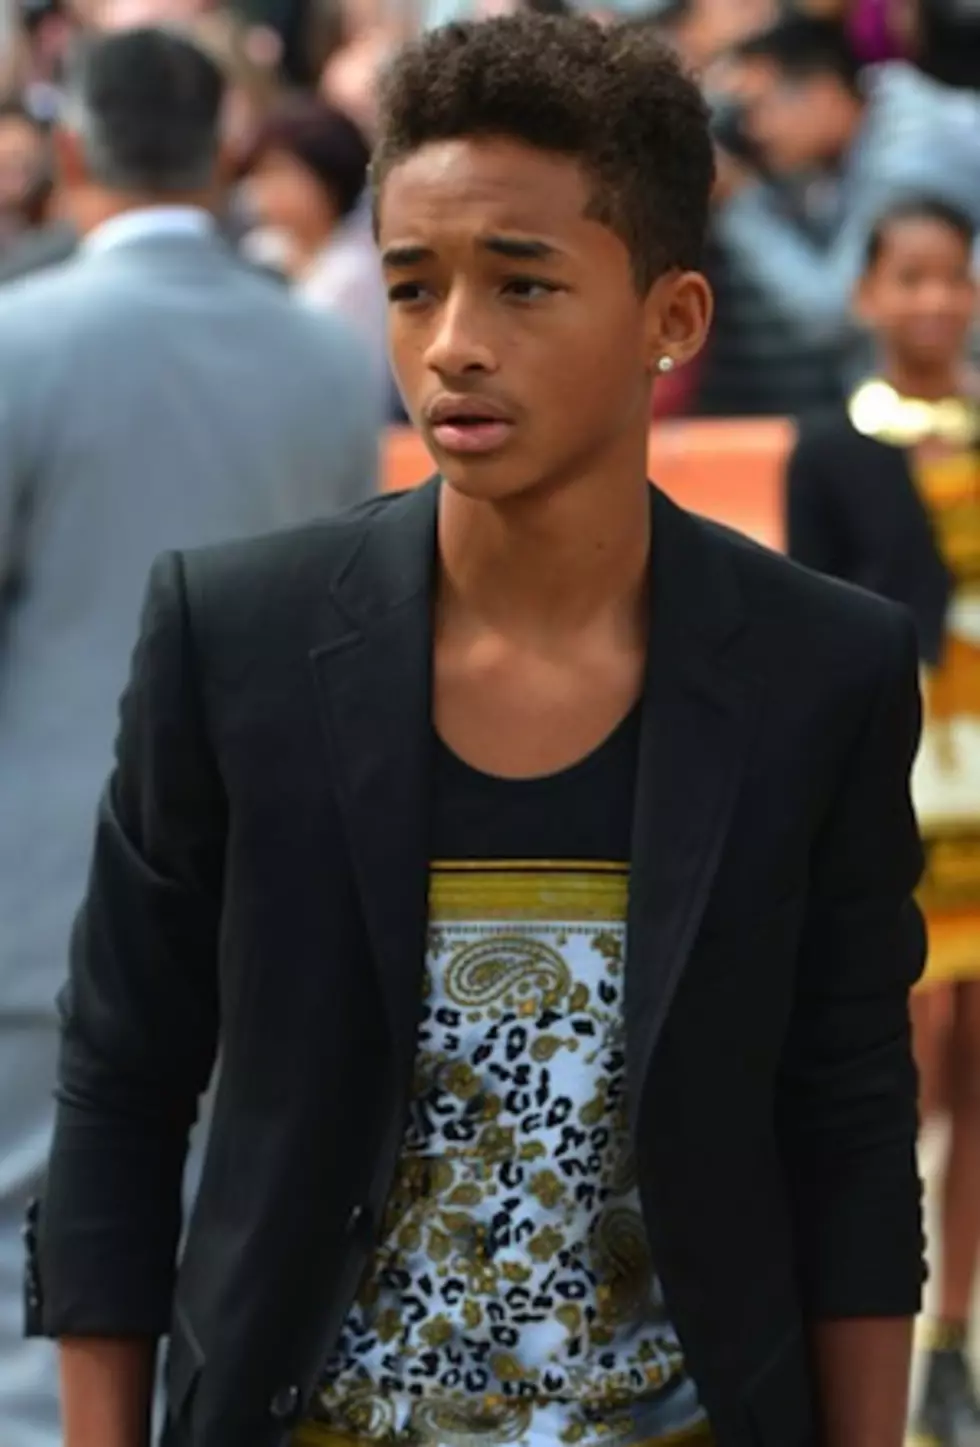 Jaden Smith - Rappers Who Were Born Rich